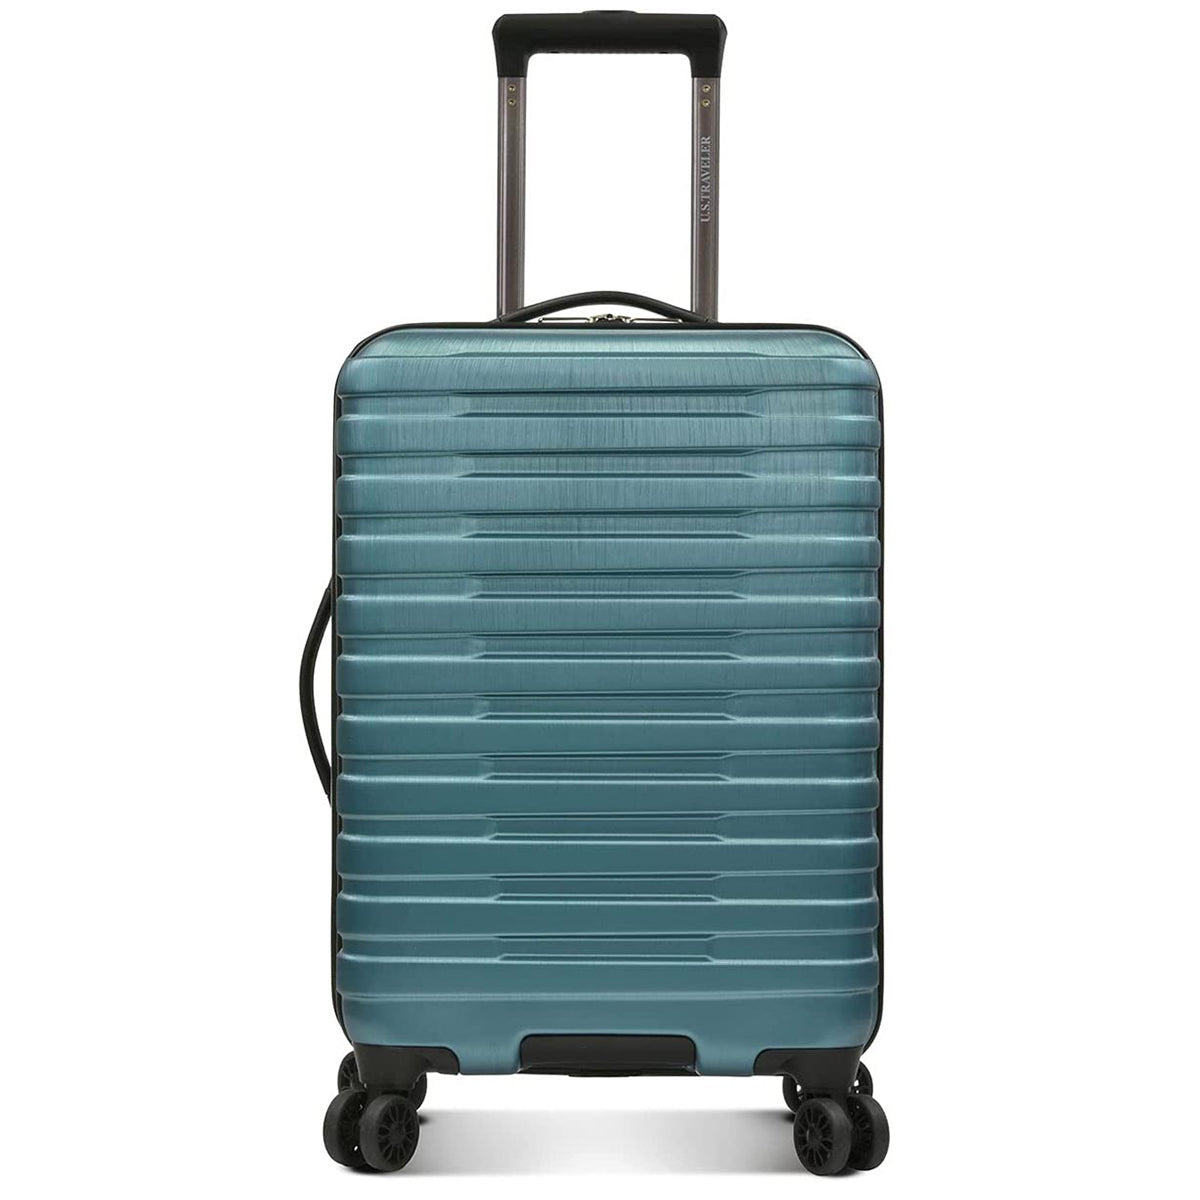 U.S. Traveler Anzio Softside Expandable Spinner Luggage, Teal, Carry-On 22-inch